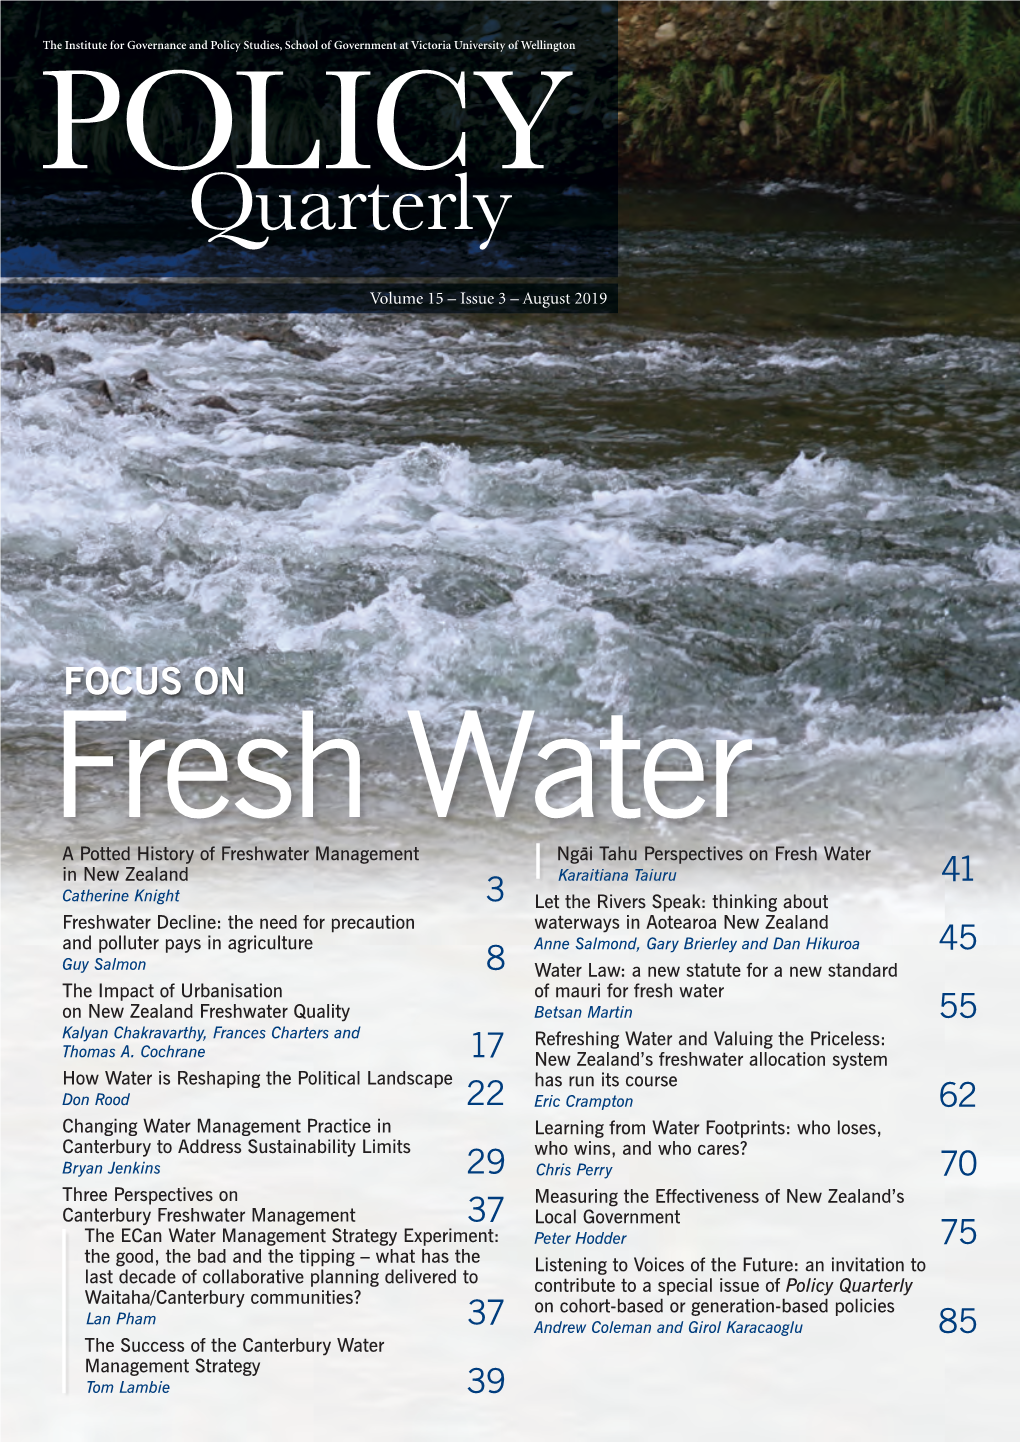 A Potted History of Freshwater Management in New Zealand